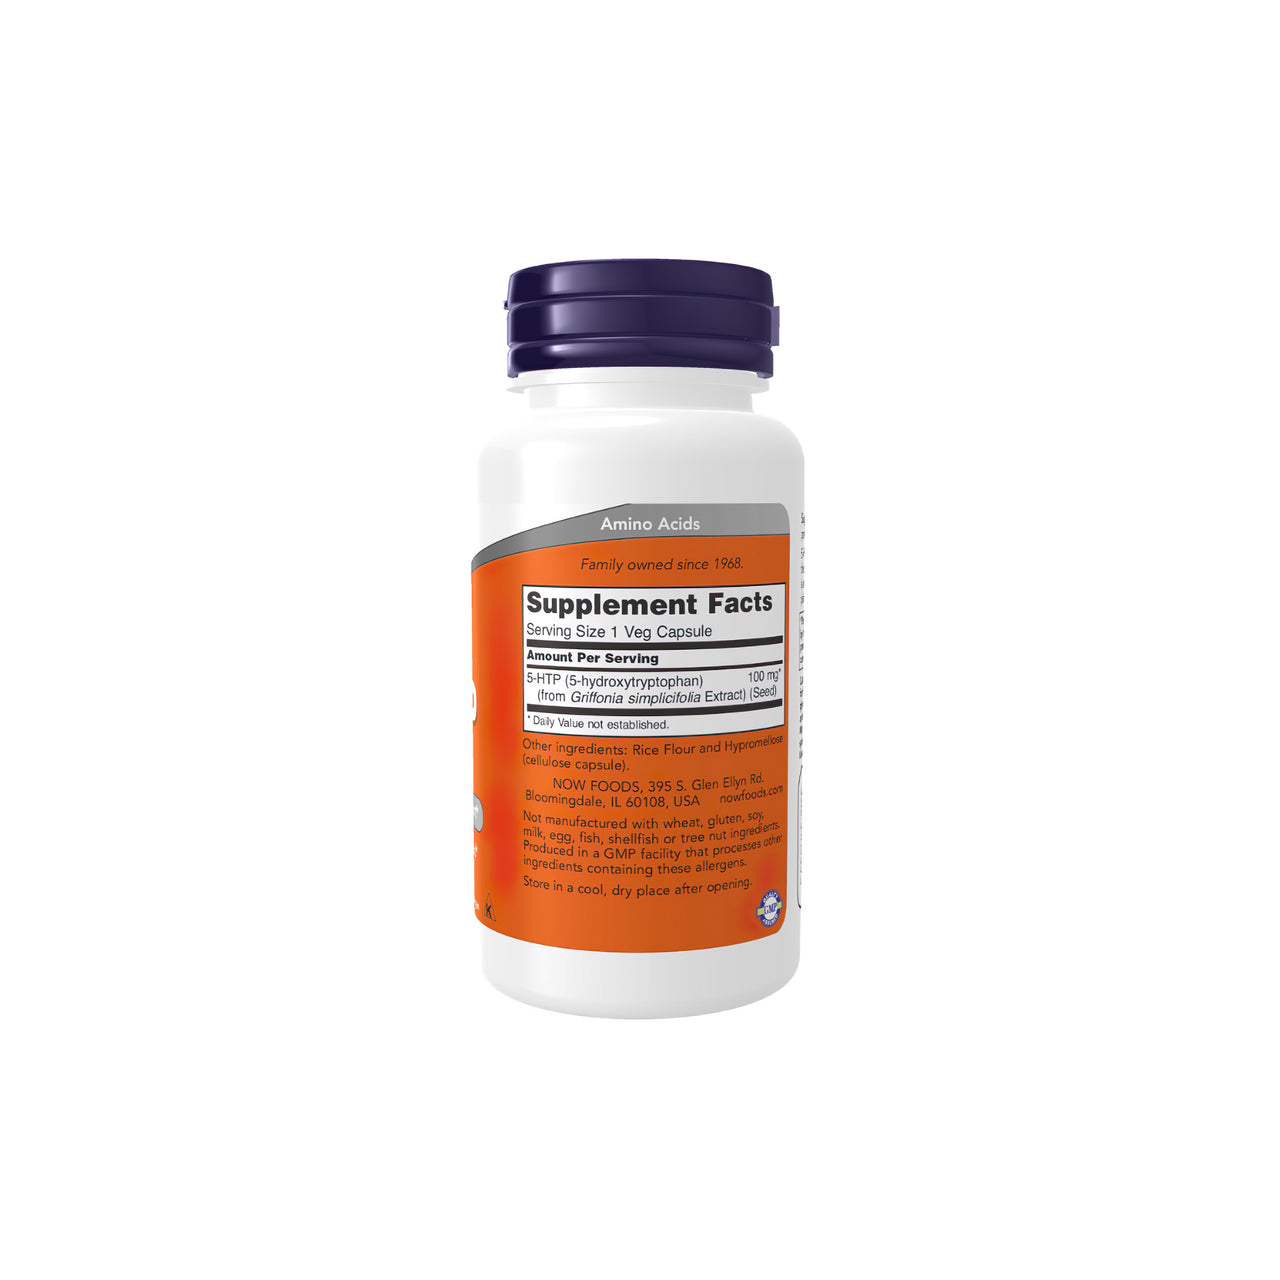 A bottle of Now Foods 5-htp 100mg 60 vege capsules on a white background.